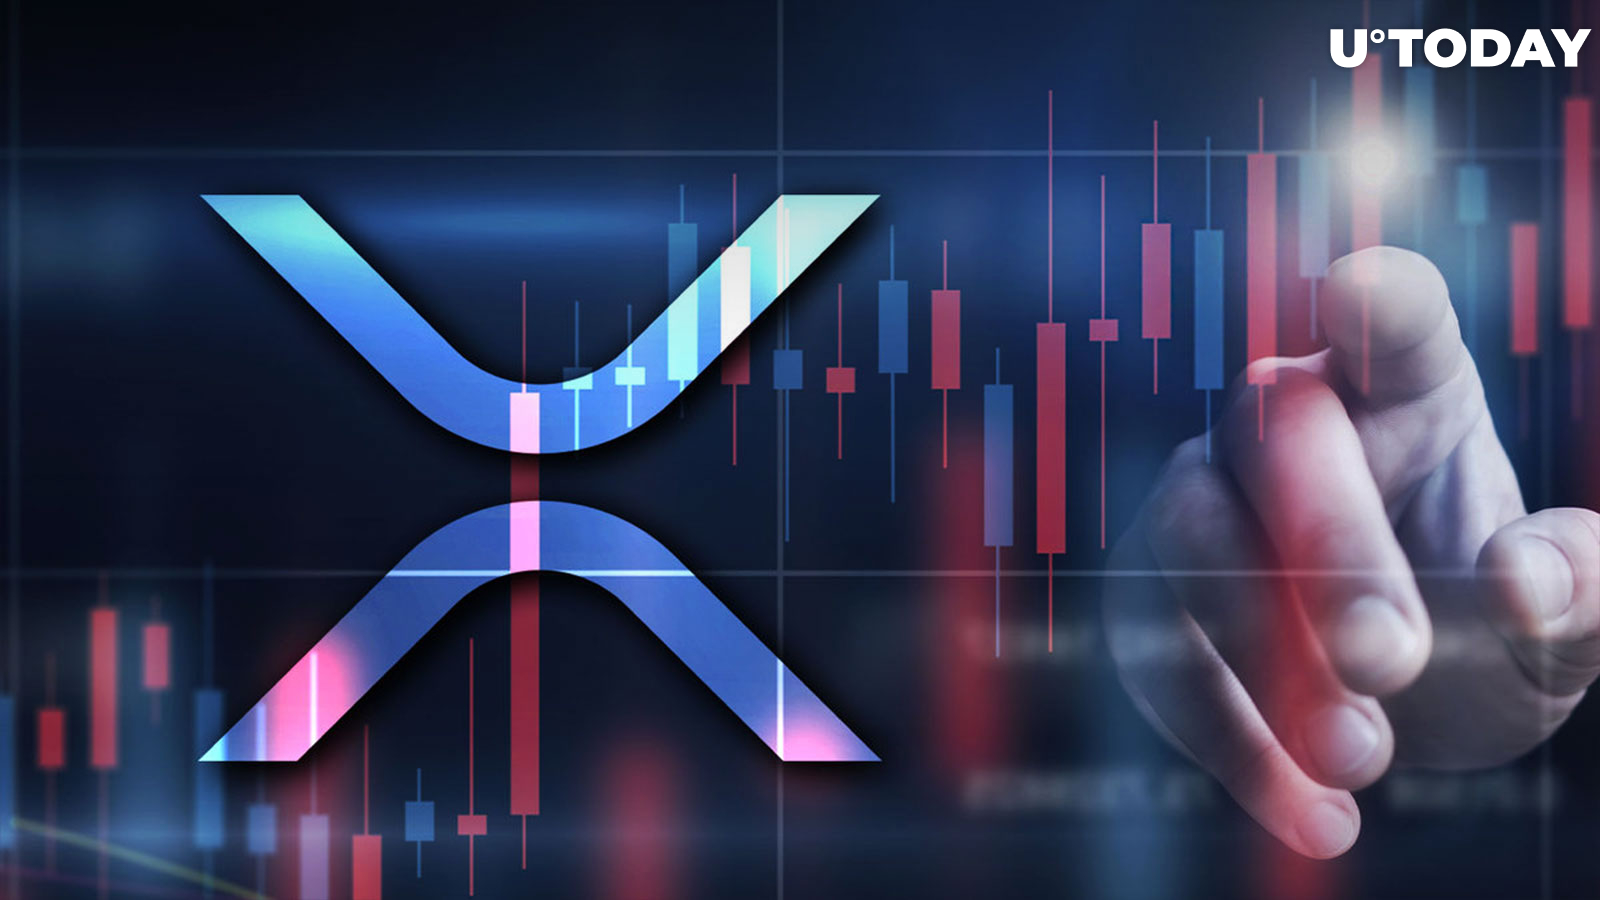 XRP Among Worst-Performing Cryptocurrencies as Post-Ruling Euphoria Fades 